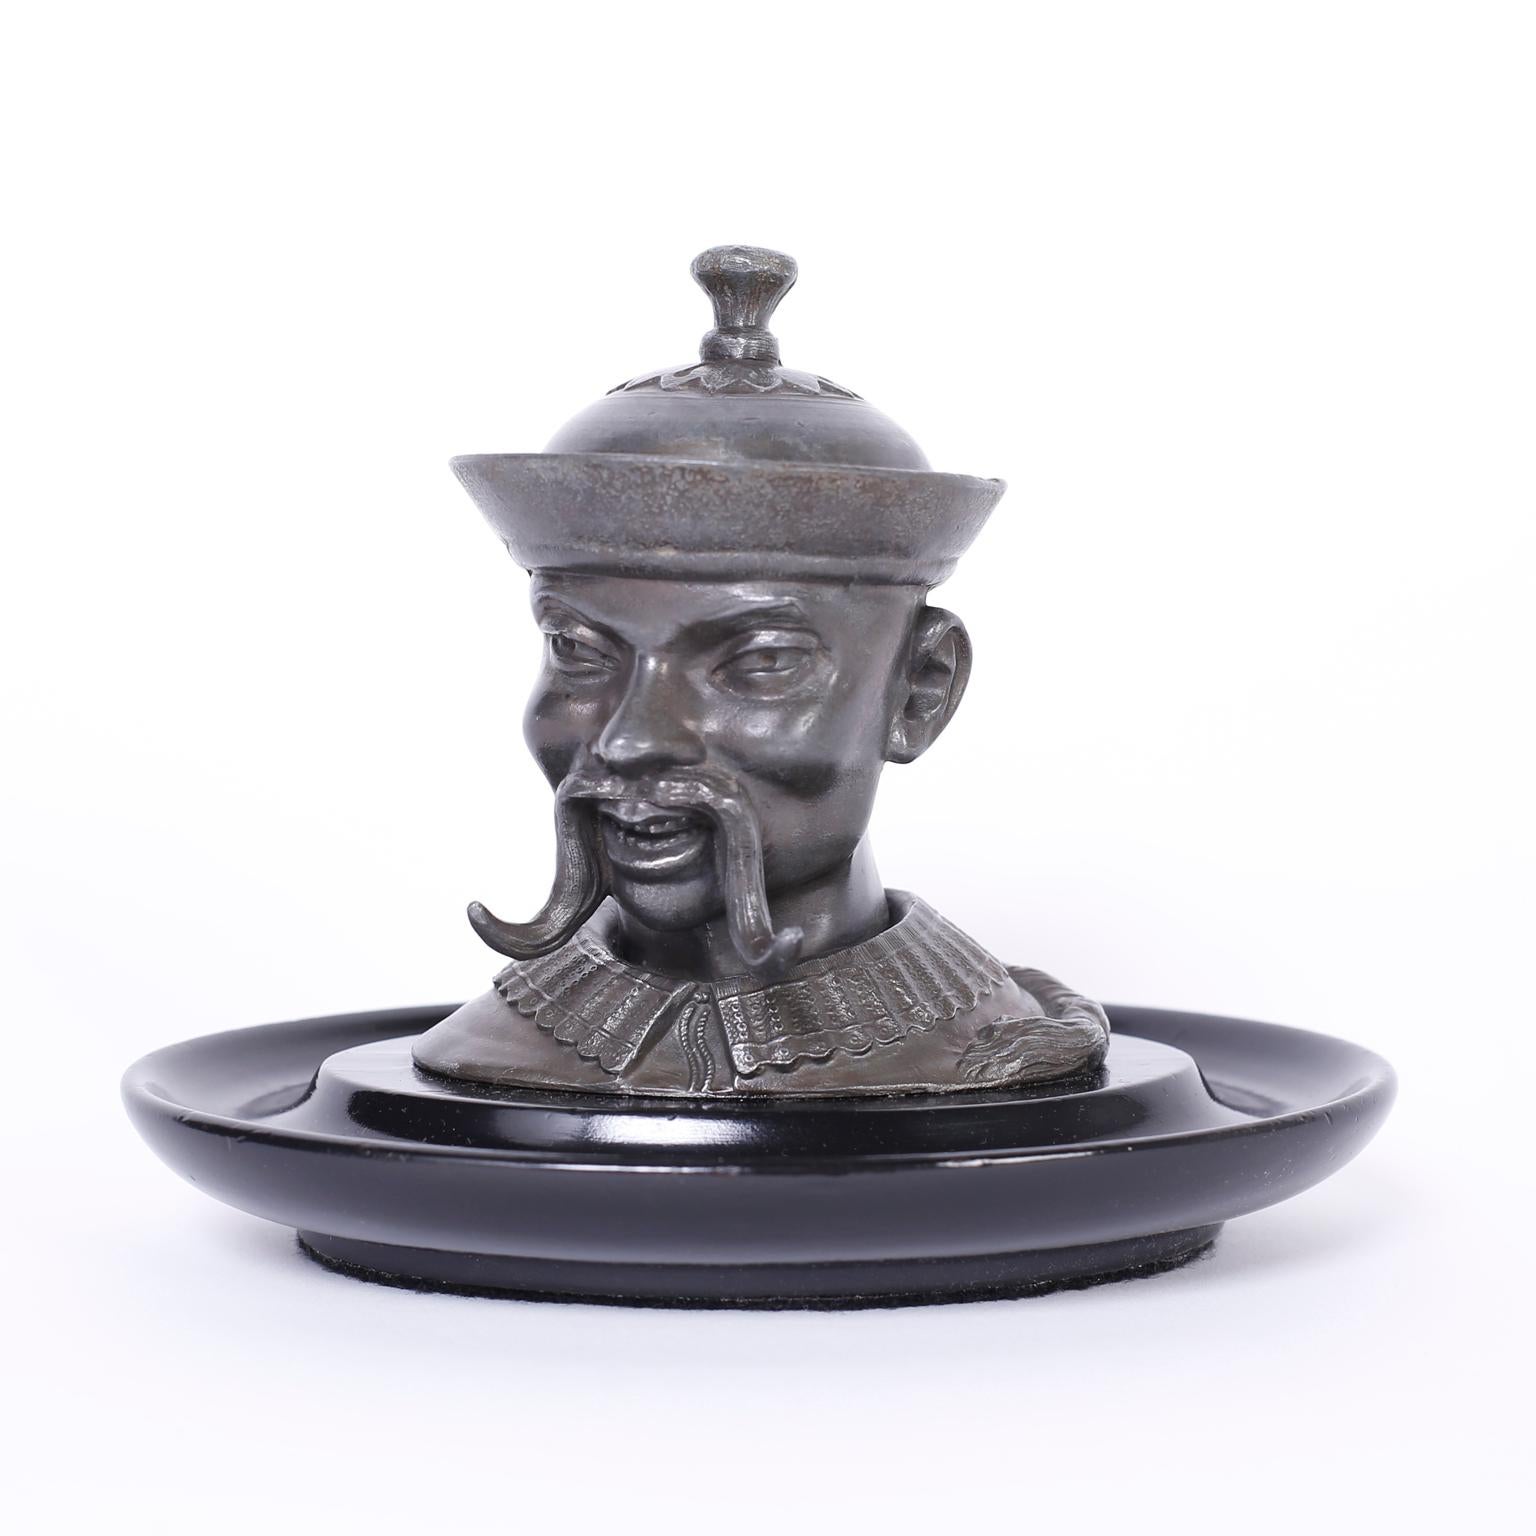 Antique English cast pewter inkwell of an Asian scholar sporting a Fu Manchu mustache and ponytail, fixed to a lacquered wood tray.